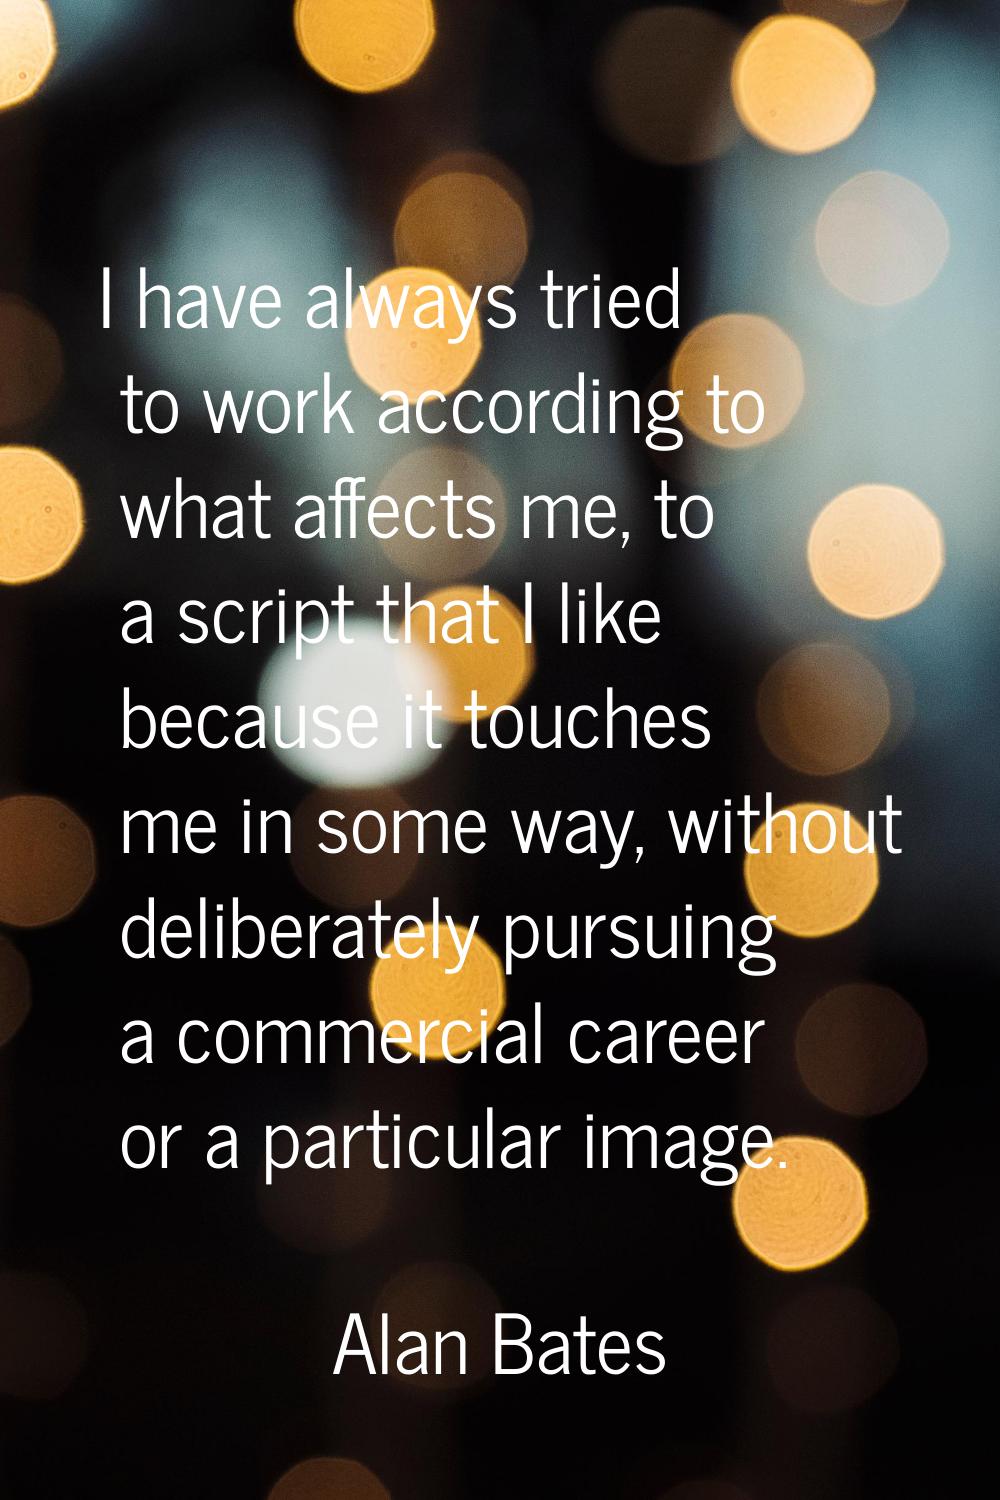 I have always tried to work according to what affects me, to a script that I like because it touche